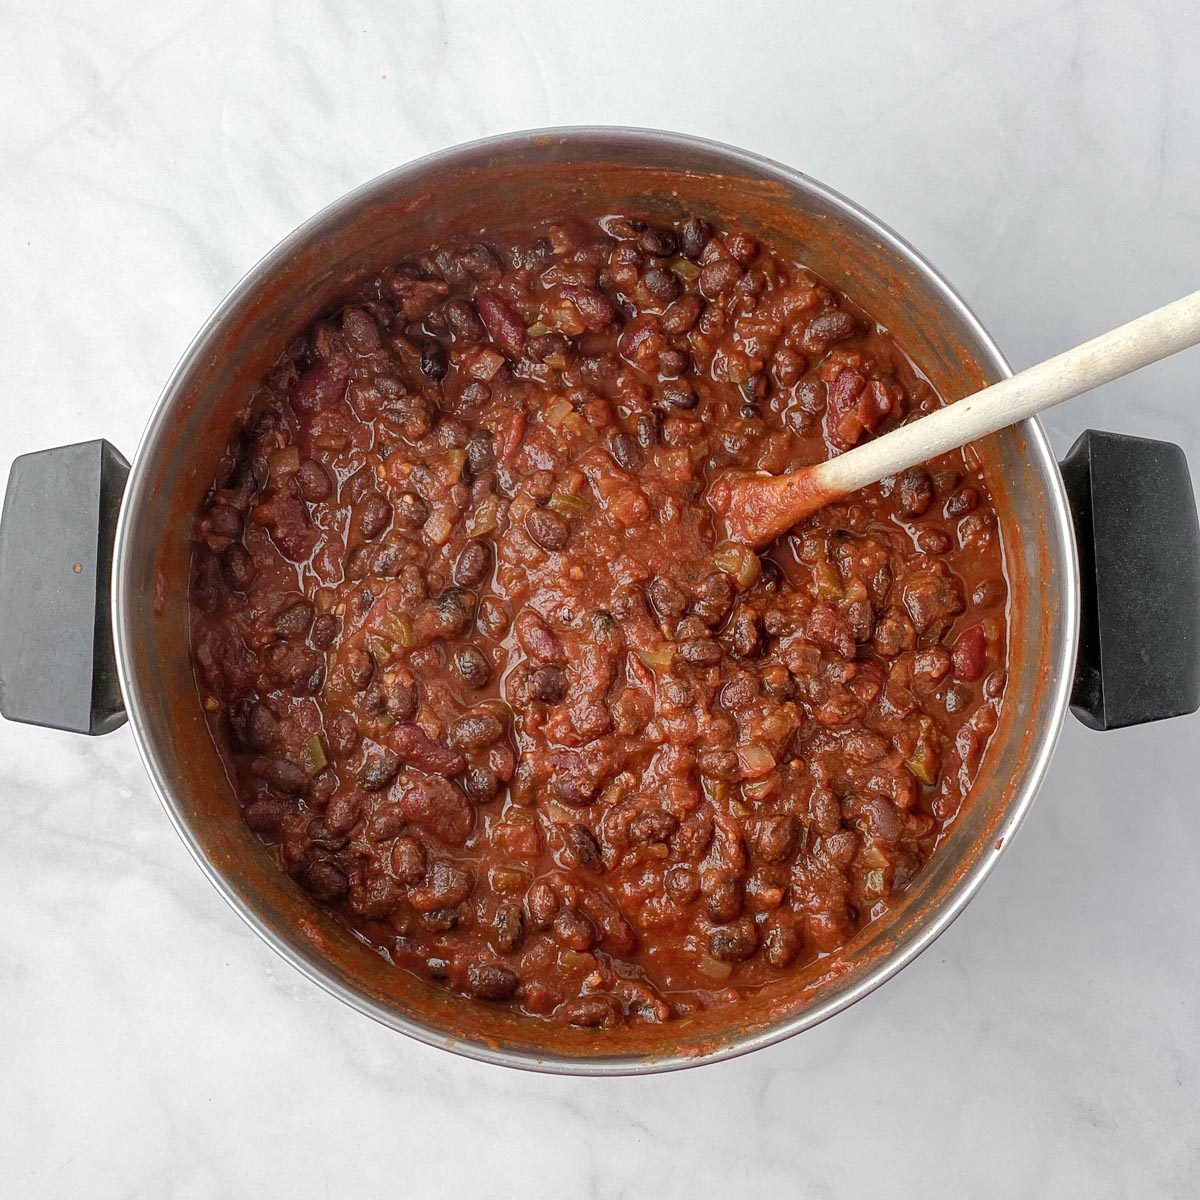 Cooked vegan chili in stainless steel pot